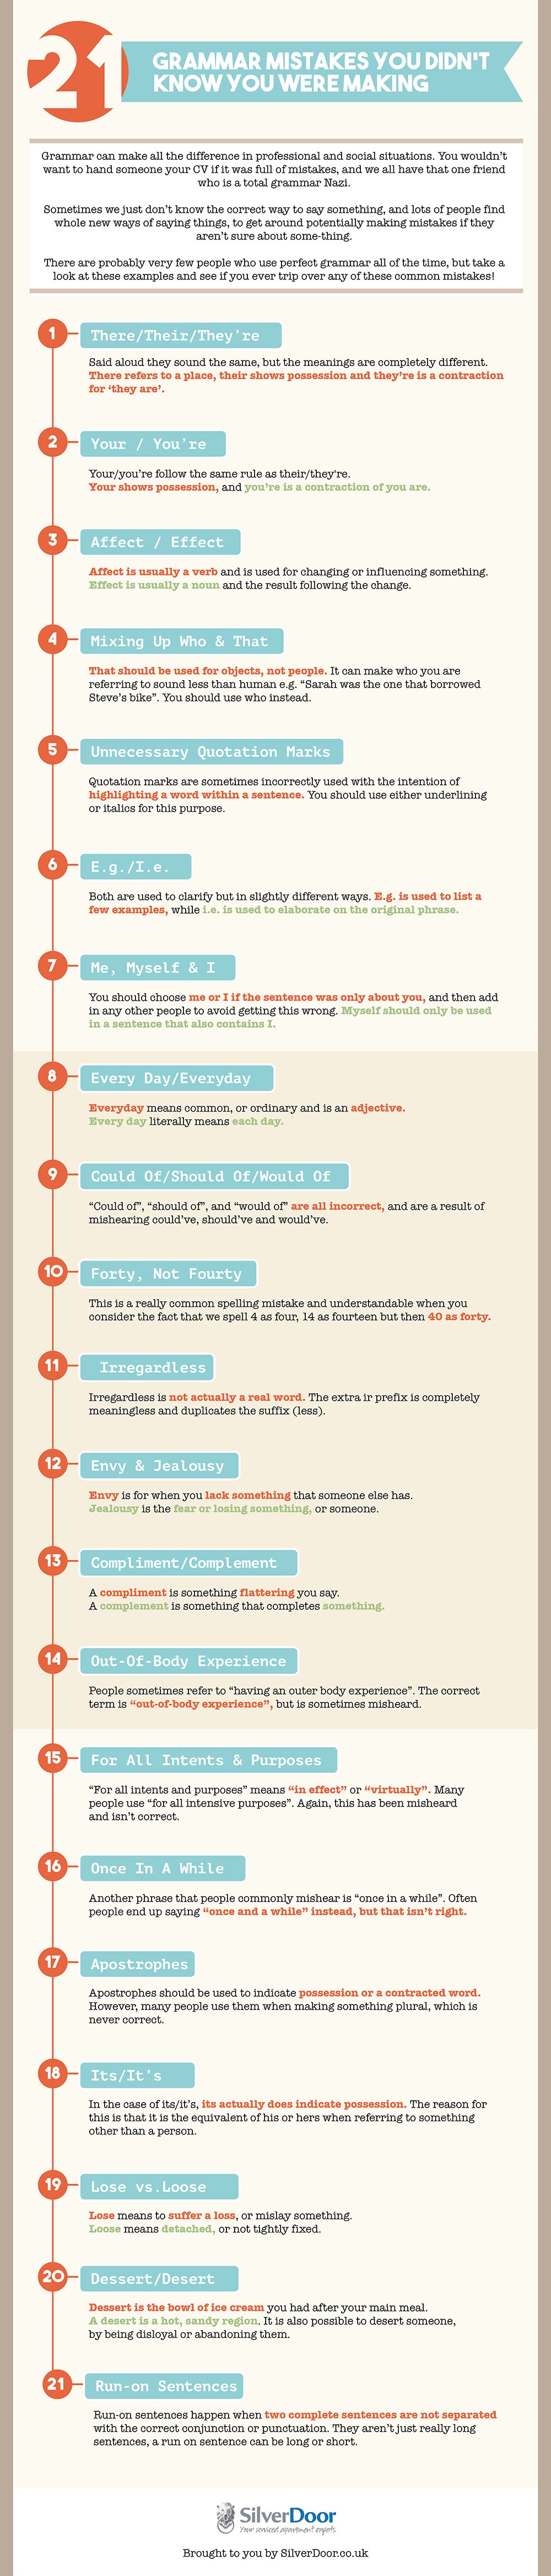 21 Grammar Mistakes You Didn’t Know You Were Making #Infographic